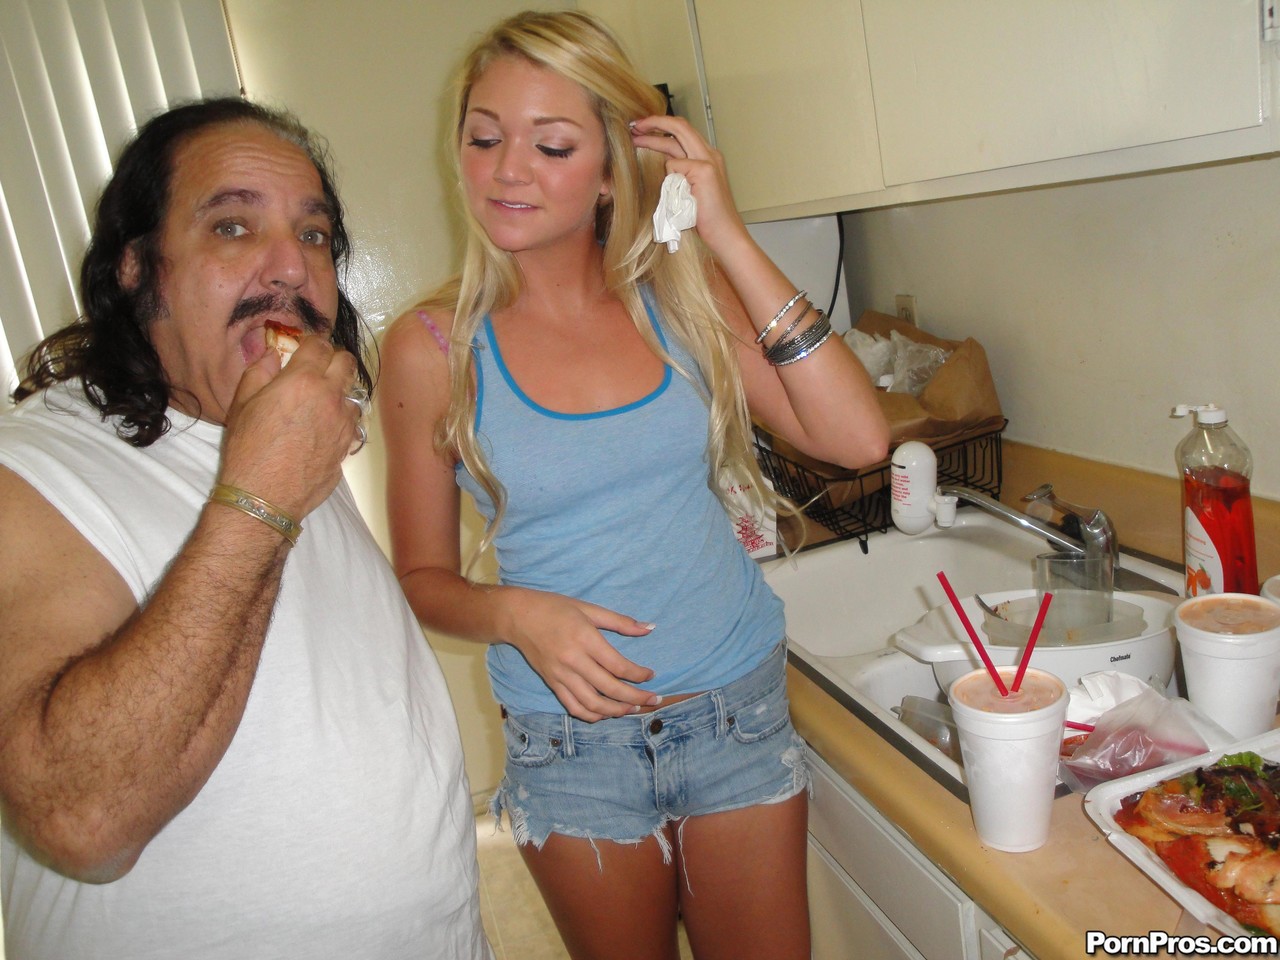 Sweet young blonde Jessie Andrews swallowing and riding an old man's cock porno foto #422620478 | Porn Pros Network Pics, Jessie Andrews, Ron Jeremy, Blonde, mobiele porno